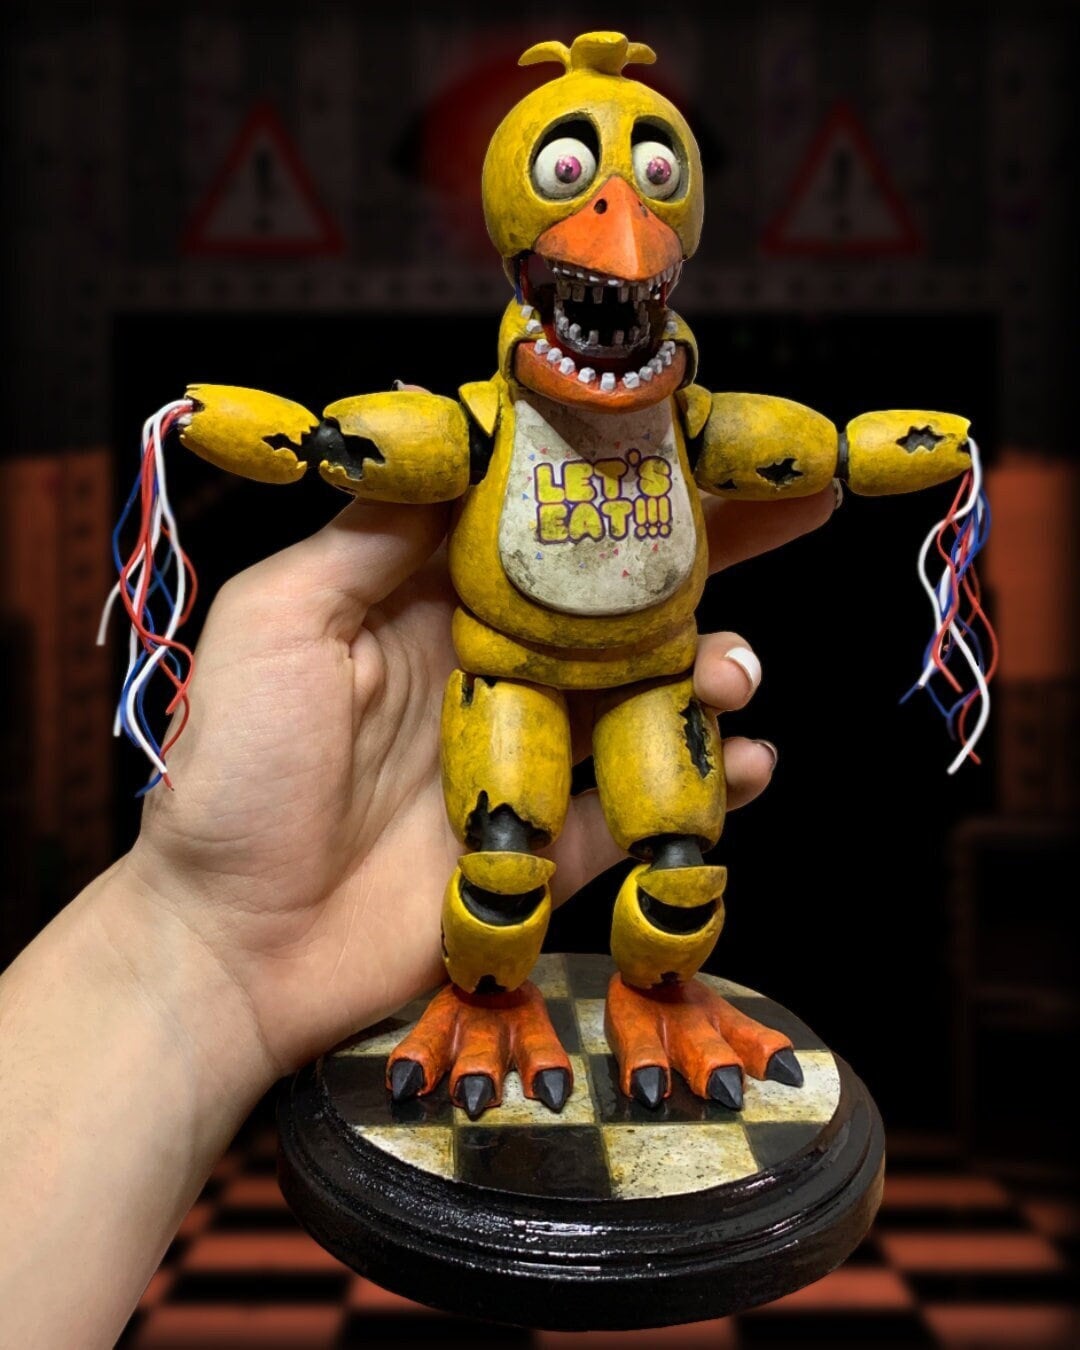 Withered Withered Withered Chica, Five Nights at Freddy's